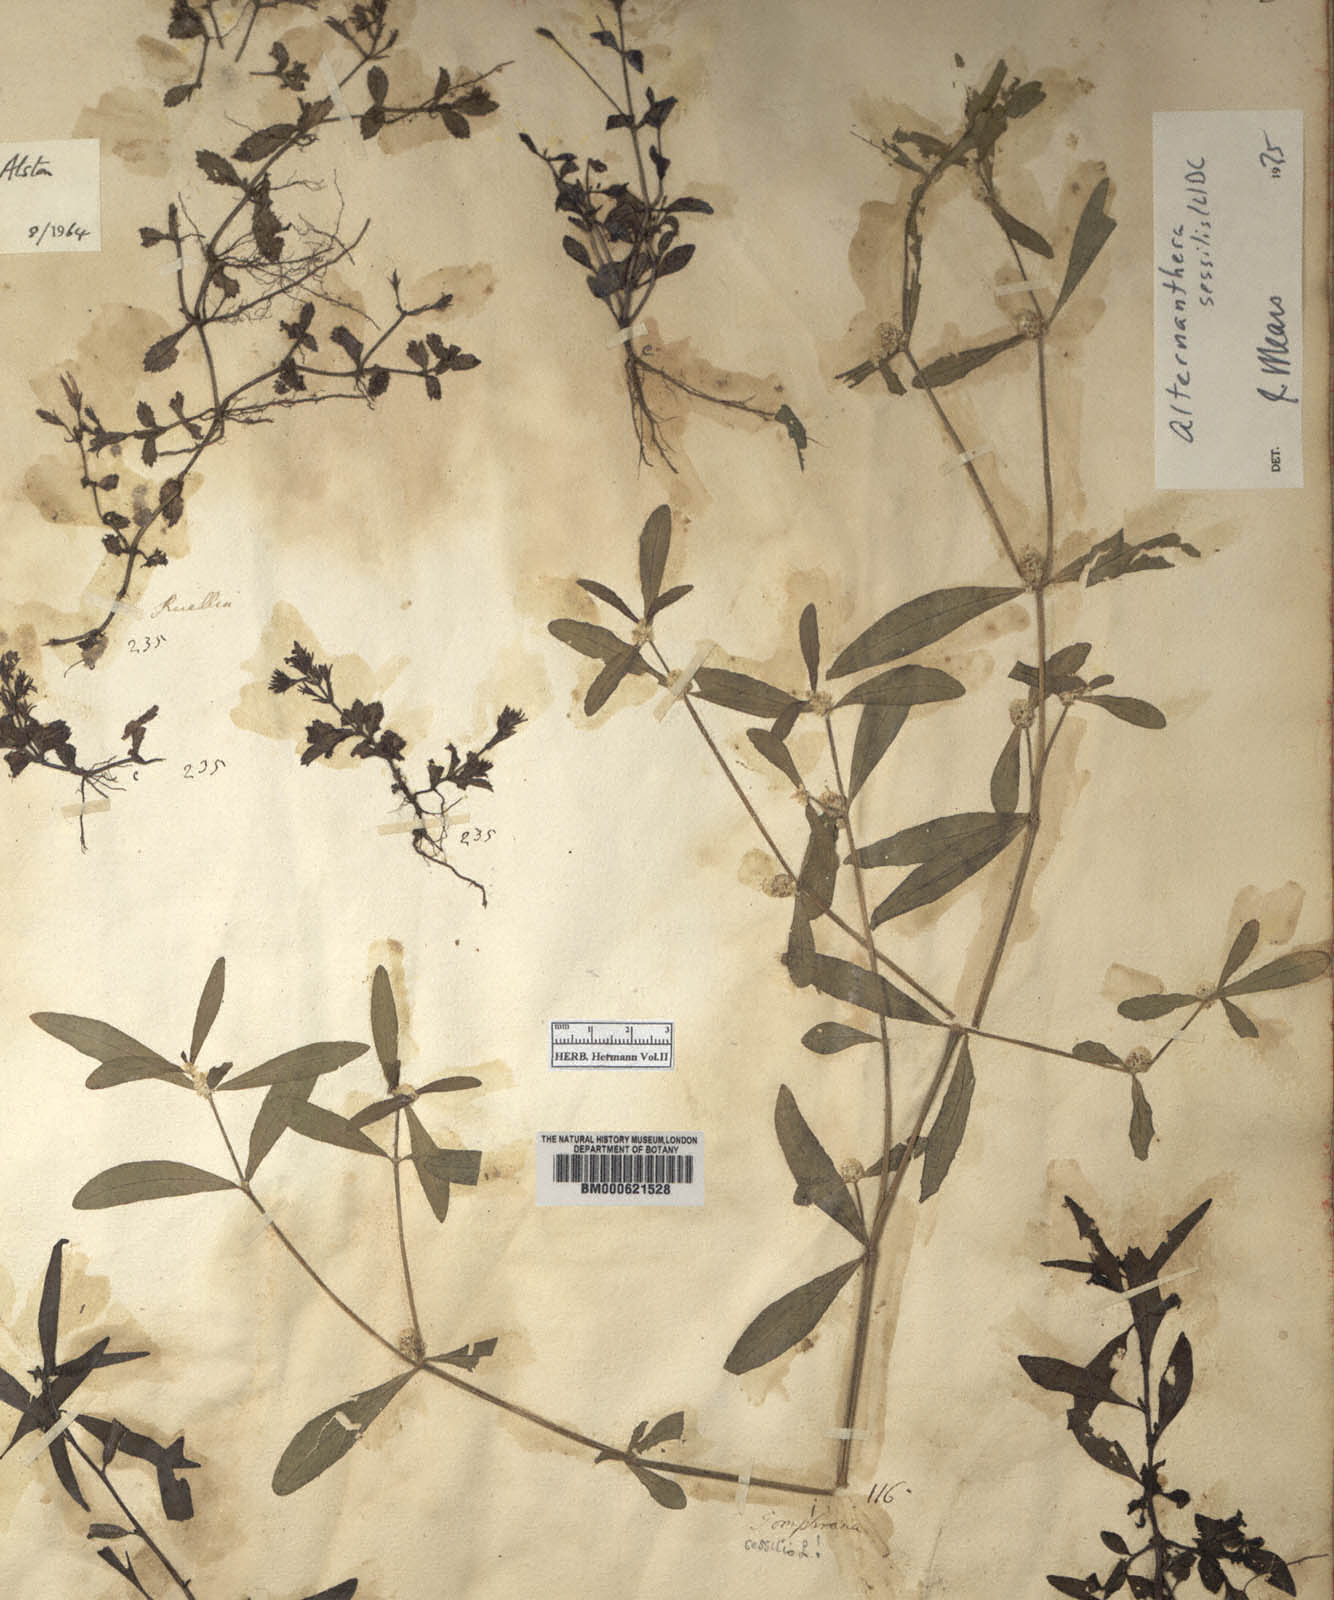 http://www.nhm.ac.uk//resources/research-curation/projects/hermann-herbarium/lgimages/BM000621528.JPG